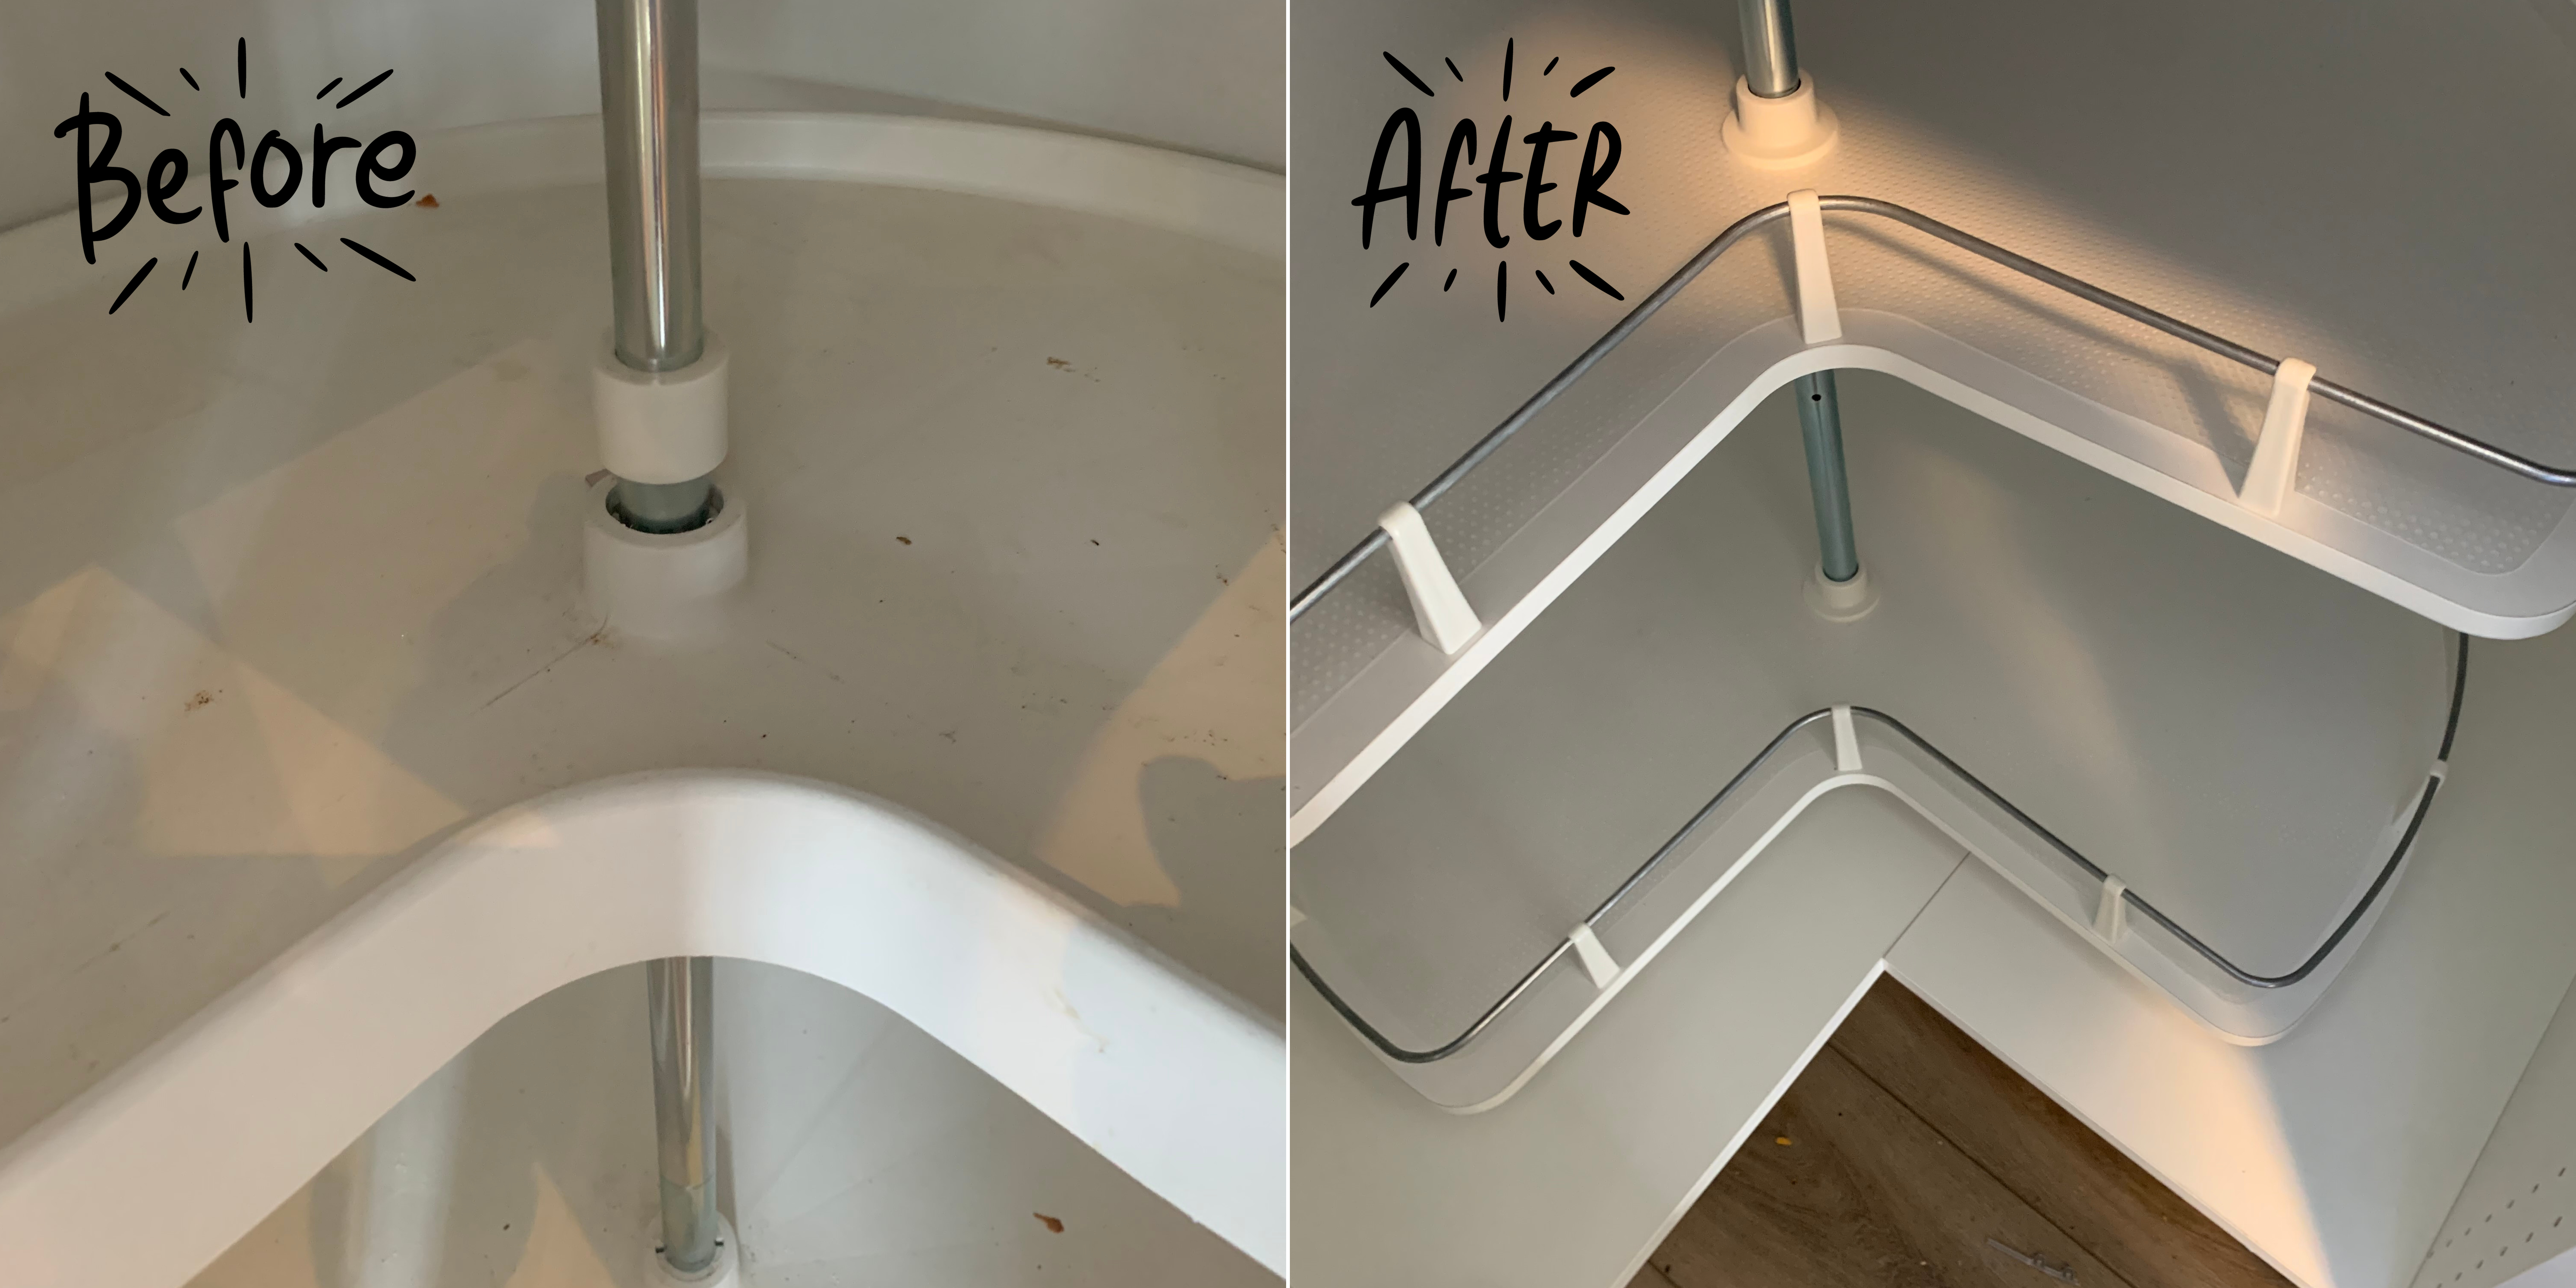 A before and after picture of the inside of a bathtub.